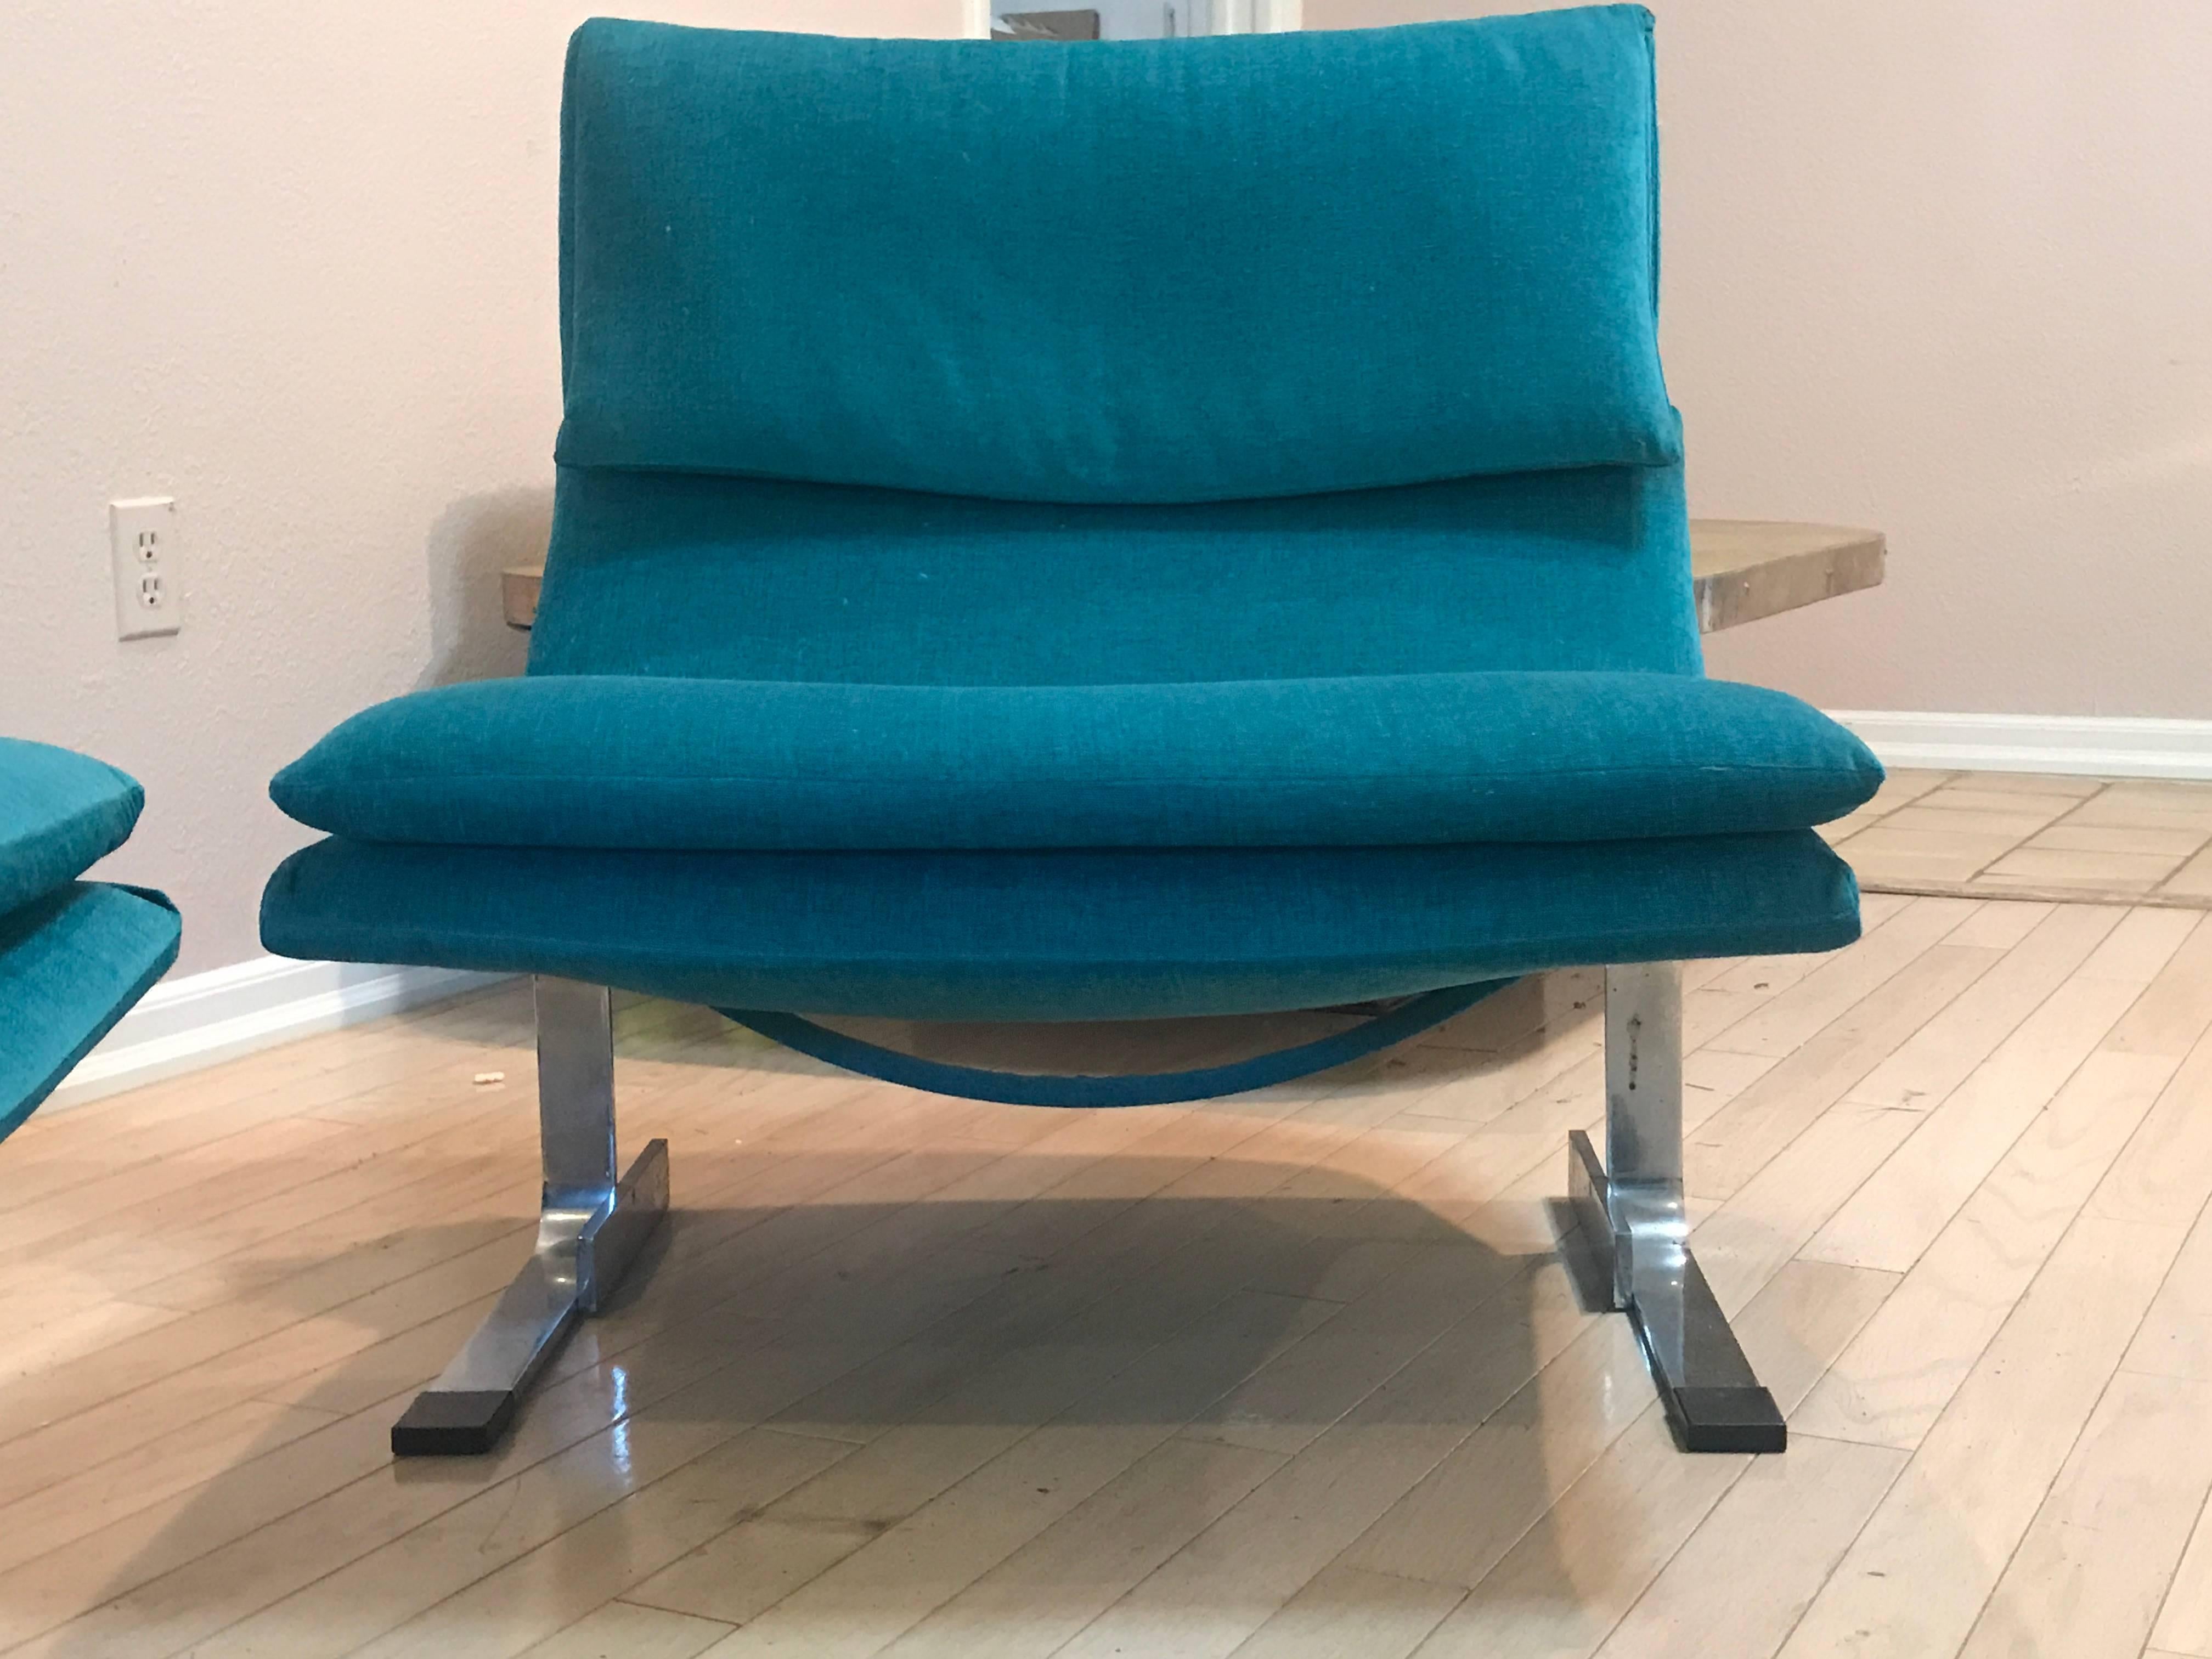 Restored entirely with new cushions and entire new fabric upholstery. Most delicious and comfortable chairs for a sitting room in a sleek 1970s chrome base that upscales any room.